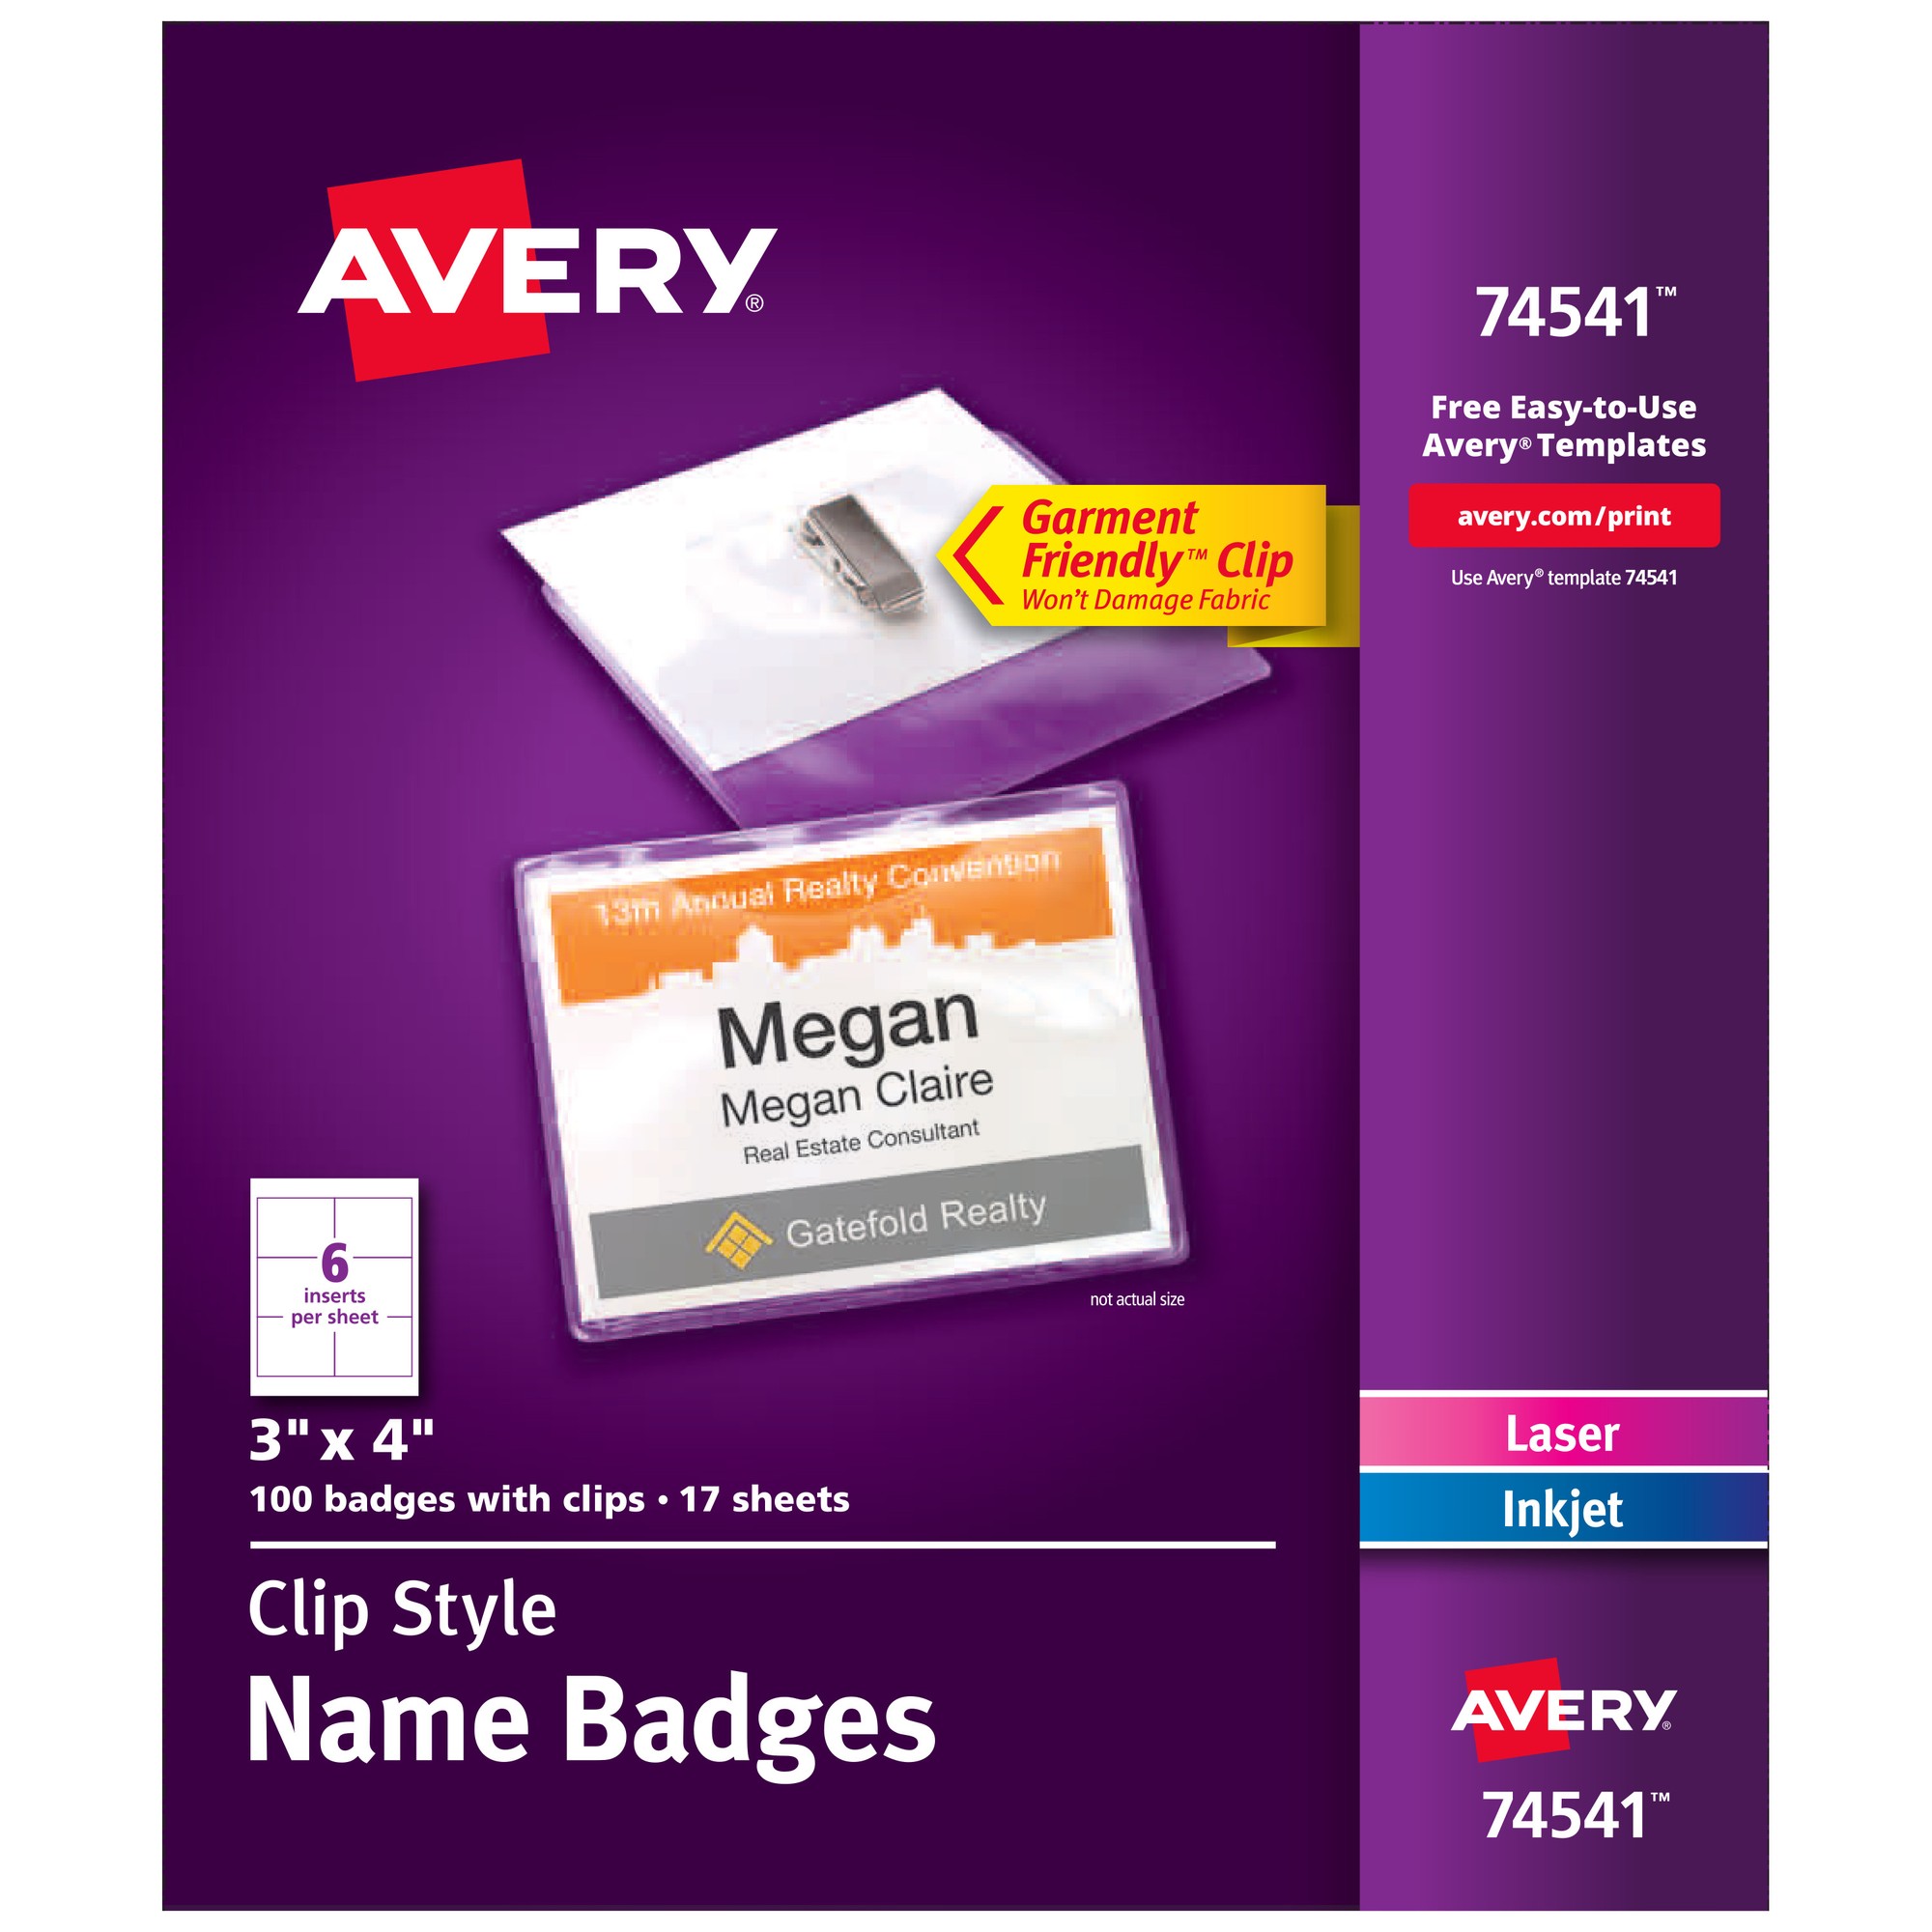 Avery Clip-Style Name Badges - 4" x 3" - 100 / Box - Clip